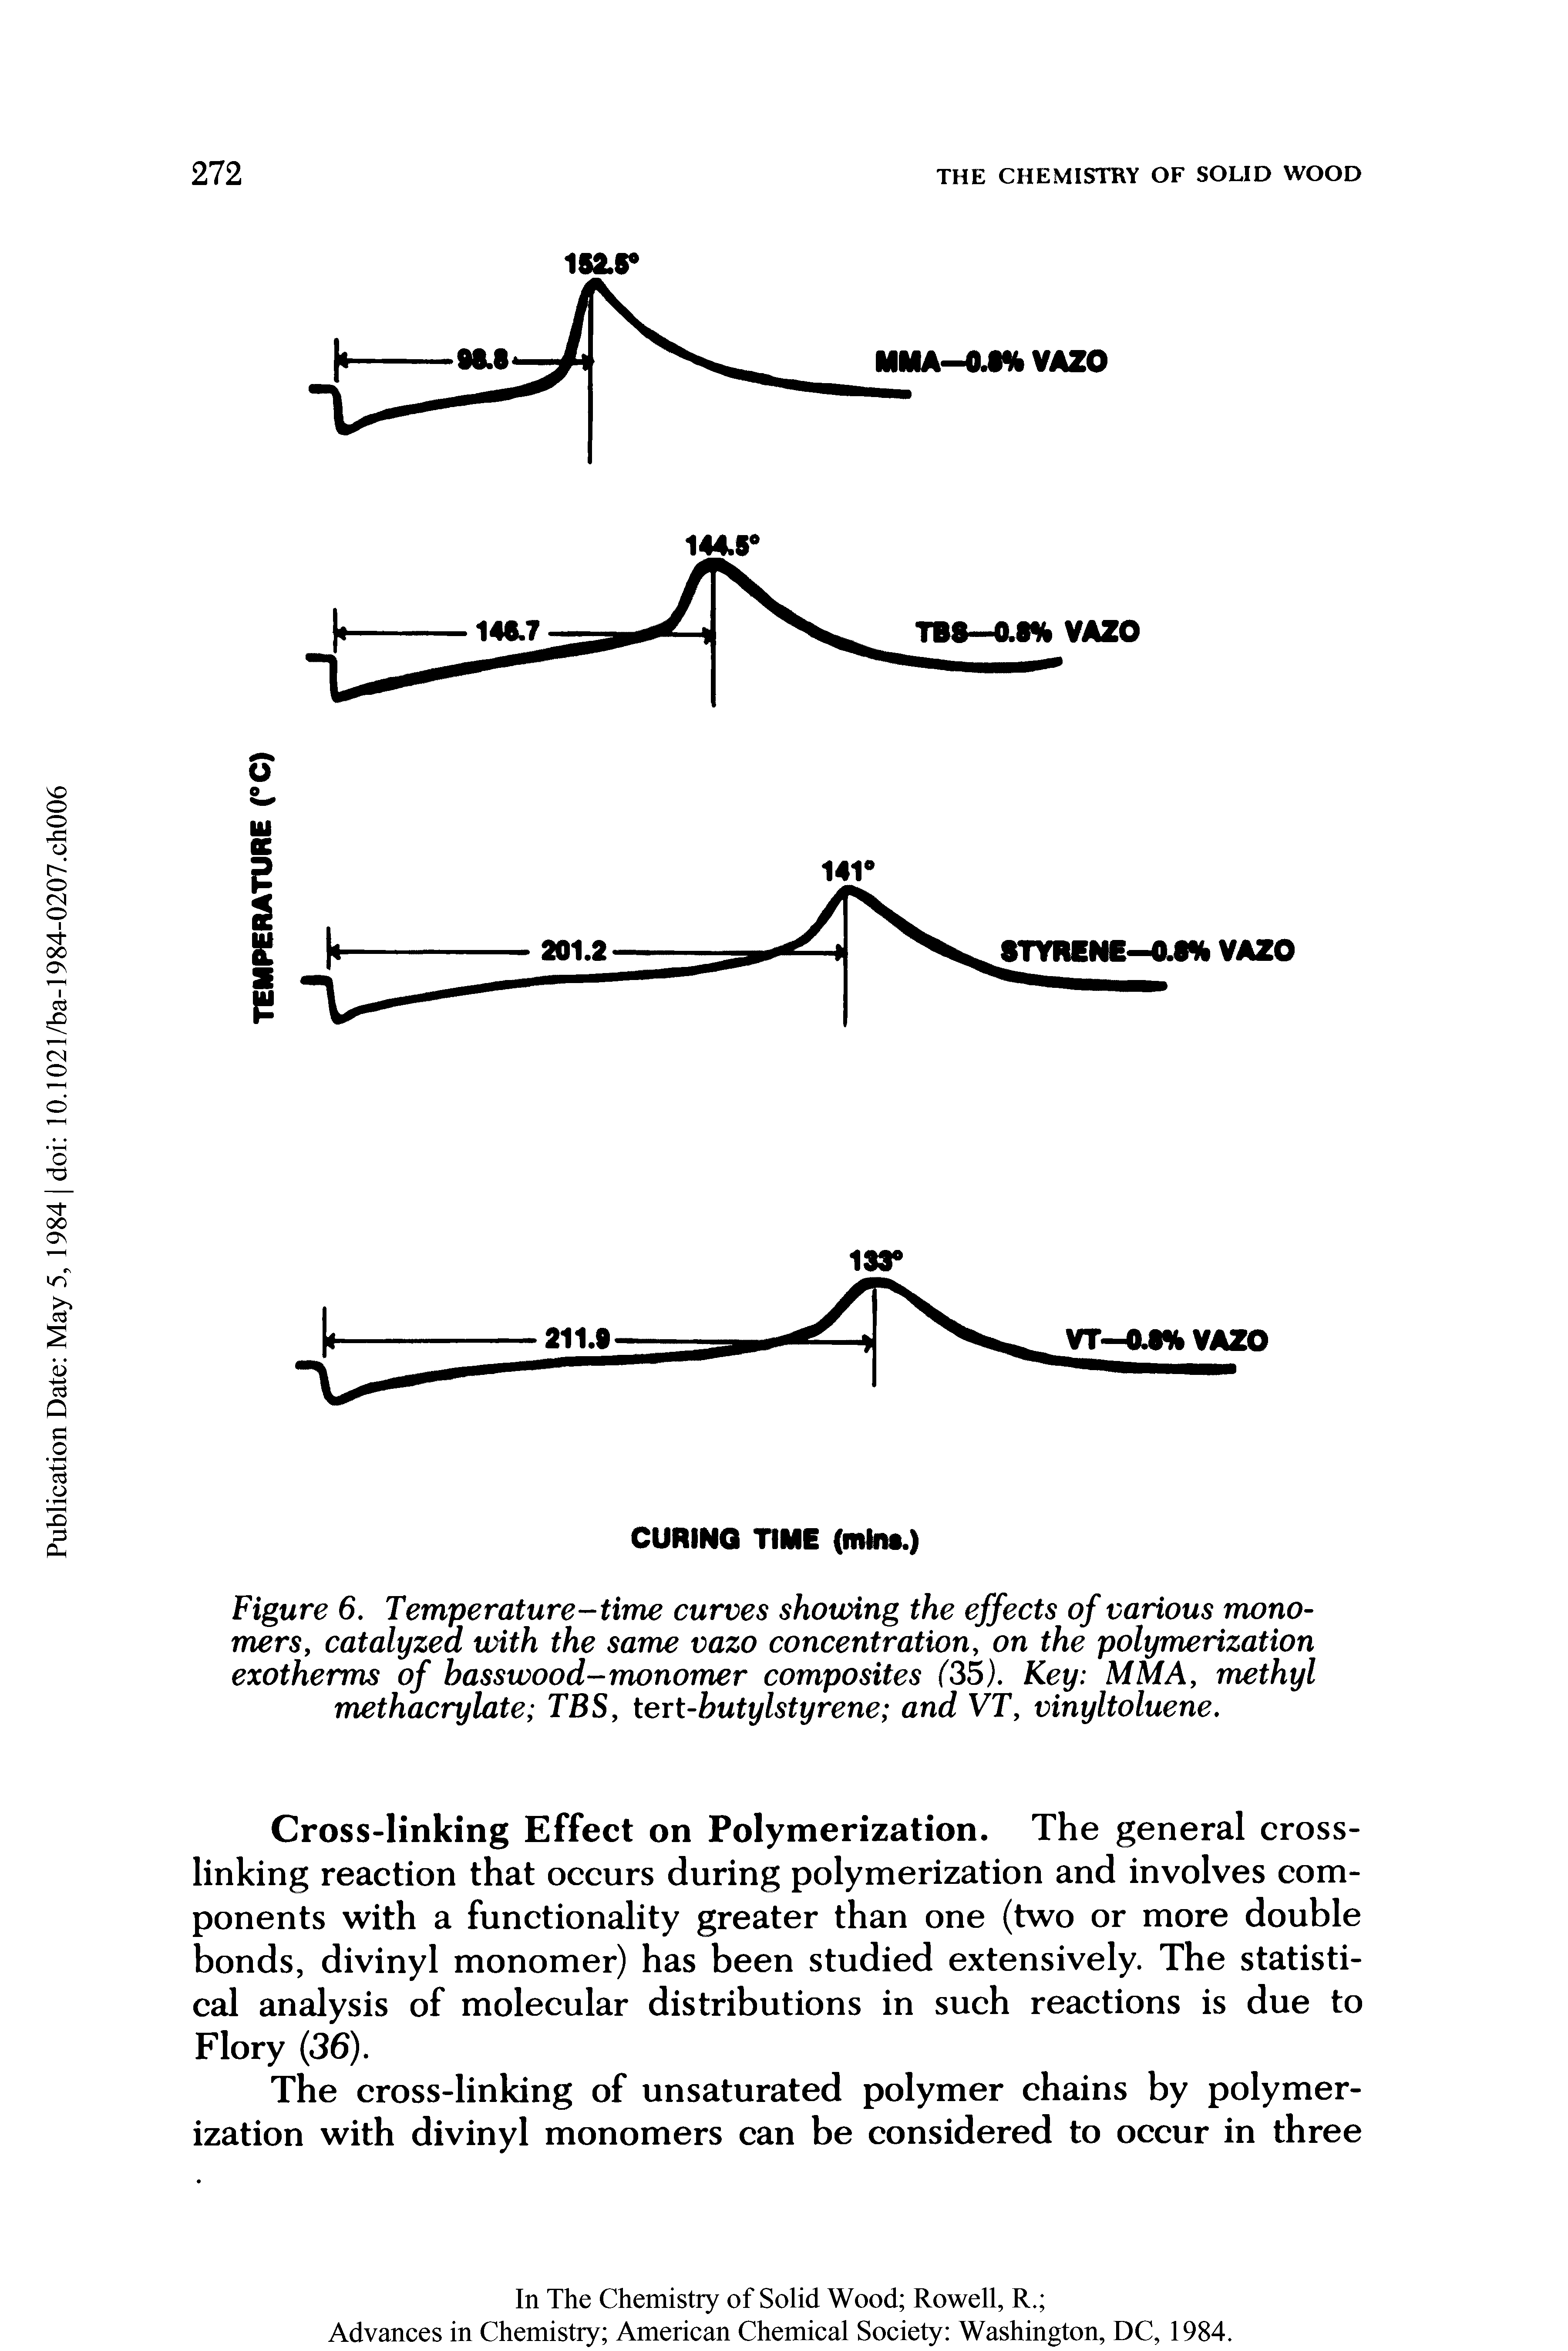 Figure 6. Temperature-time curves showing the effects of various monomers catalyzed with the same vazo concentration, on the polymerization exotherms of basswood-monomer composites (35). Key MM A, methyl methacrylate TBS, tert-butylstyrene and VT, vinyltoluene.